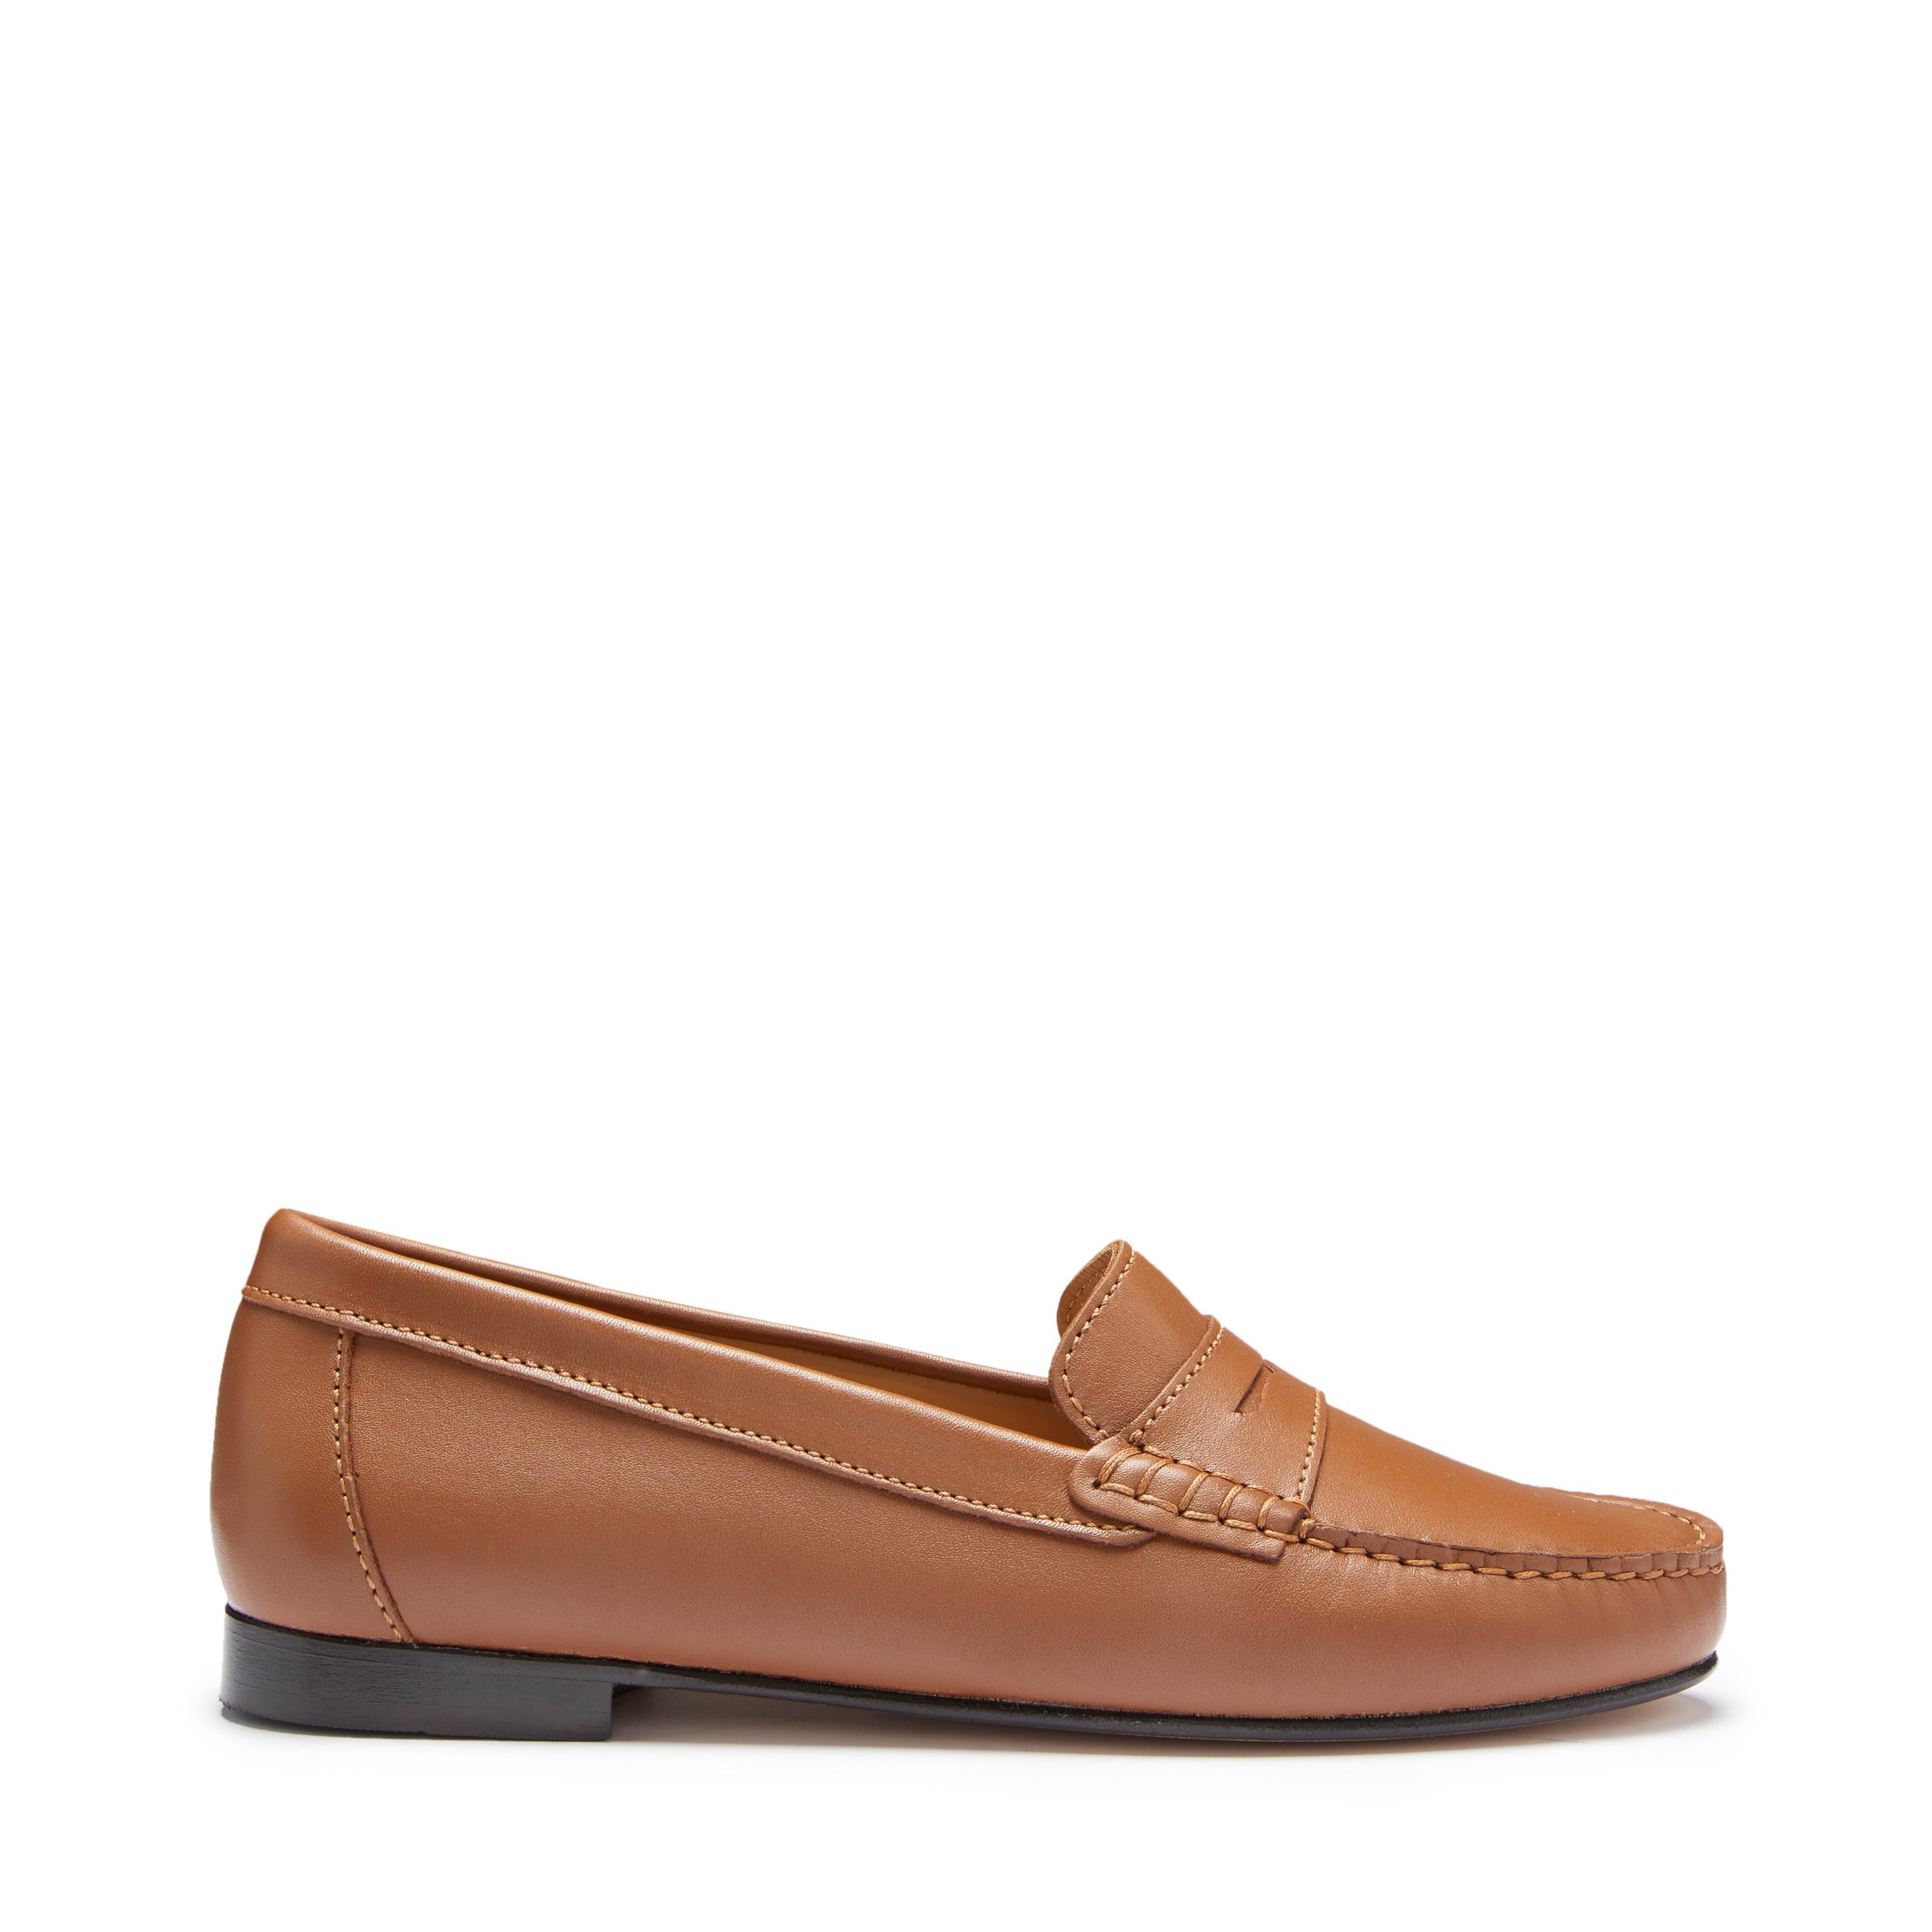 soft leather loafers womens